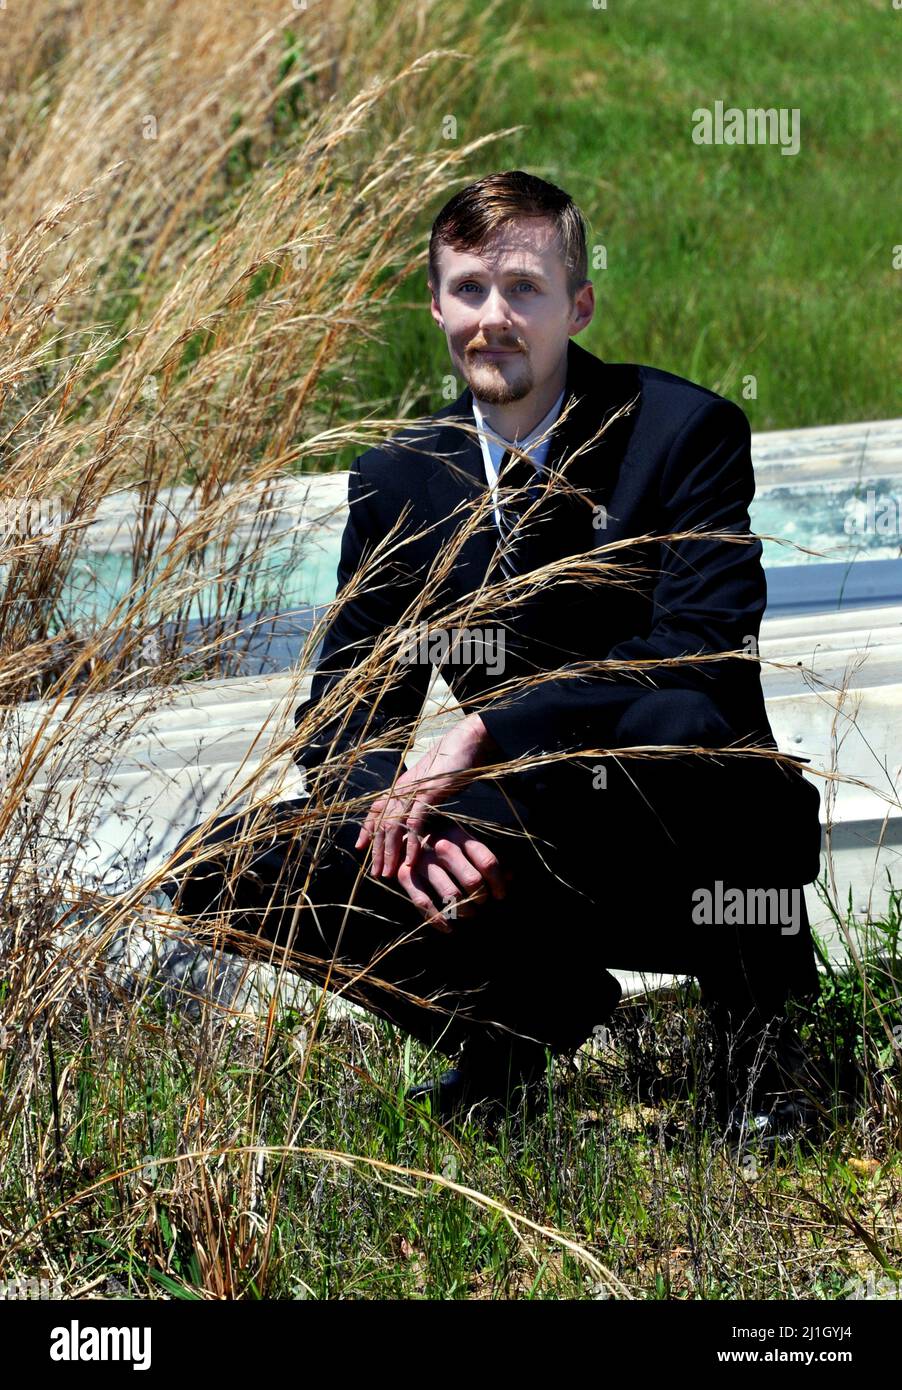 Rustic aluminum boats and golden grass surround handsome young man wearing a black business suit.  Sun is shining and man wears a small smile. Stock Photo